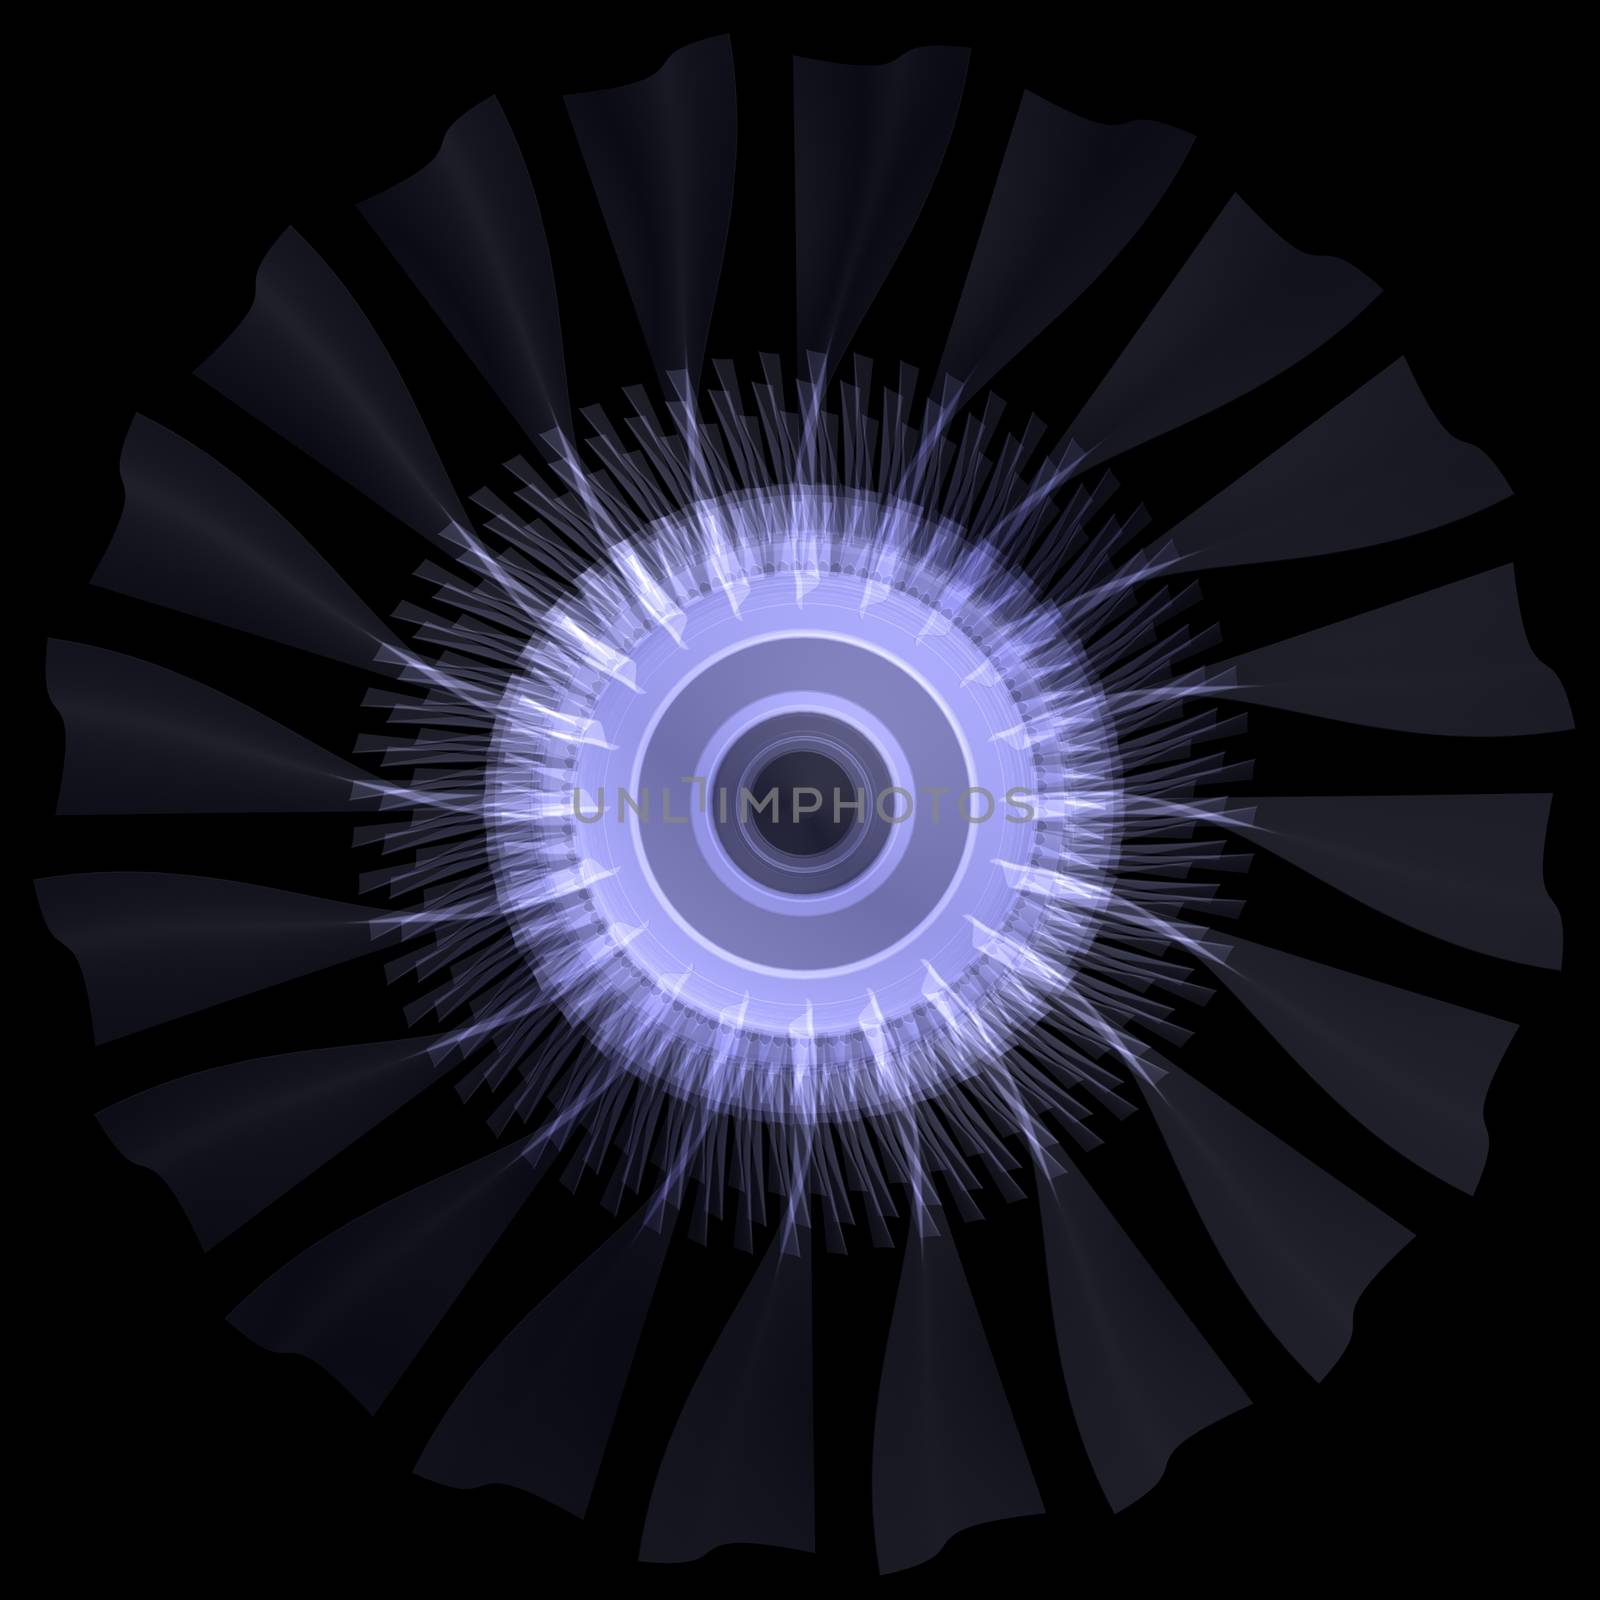 X-ray concept jet engine. Isolated render on a black background